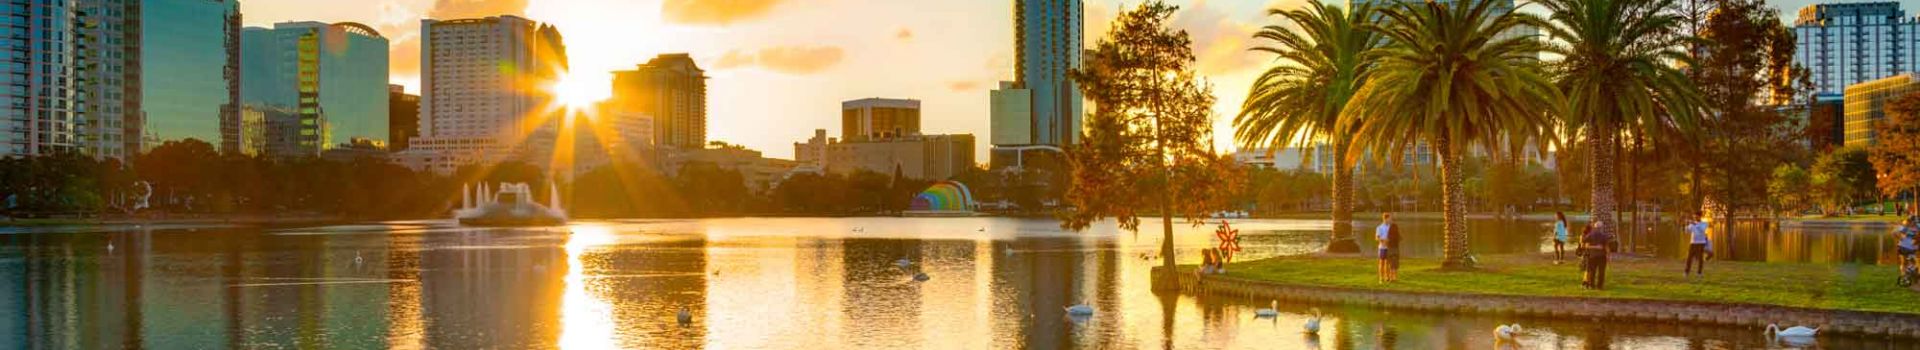 Last minute holidays to Orlando with Cassidy Travel